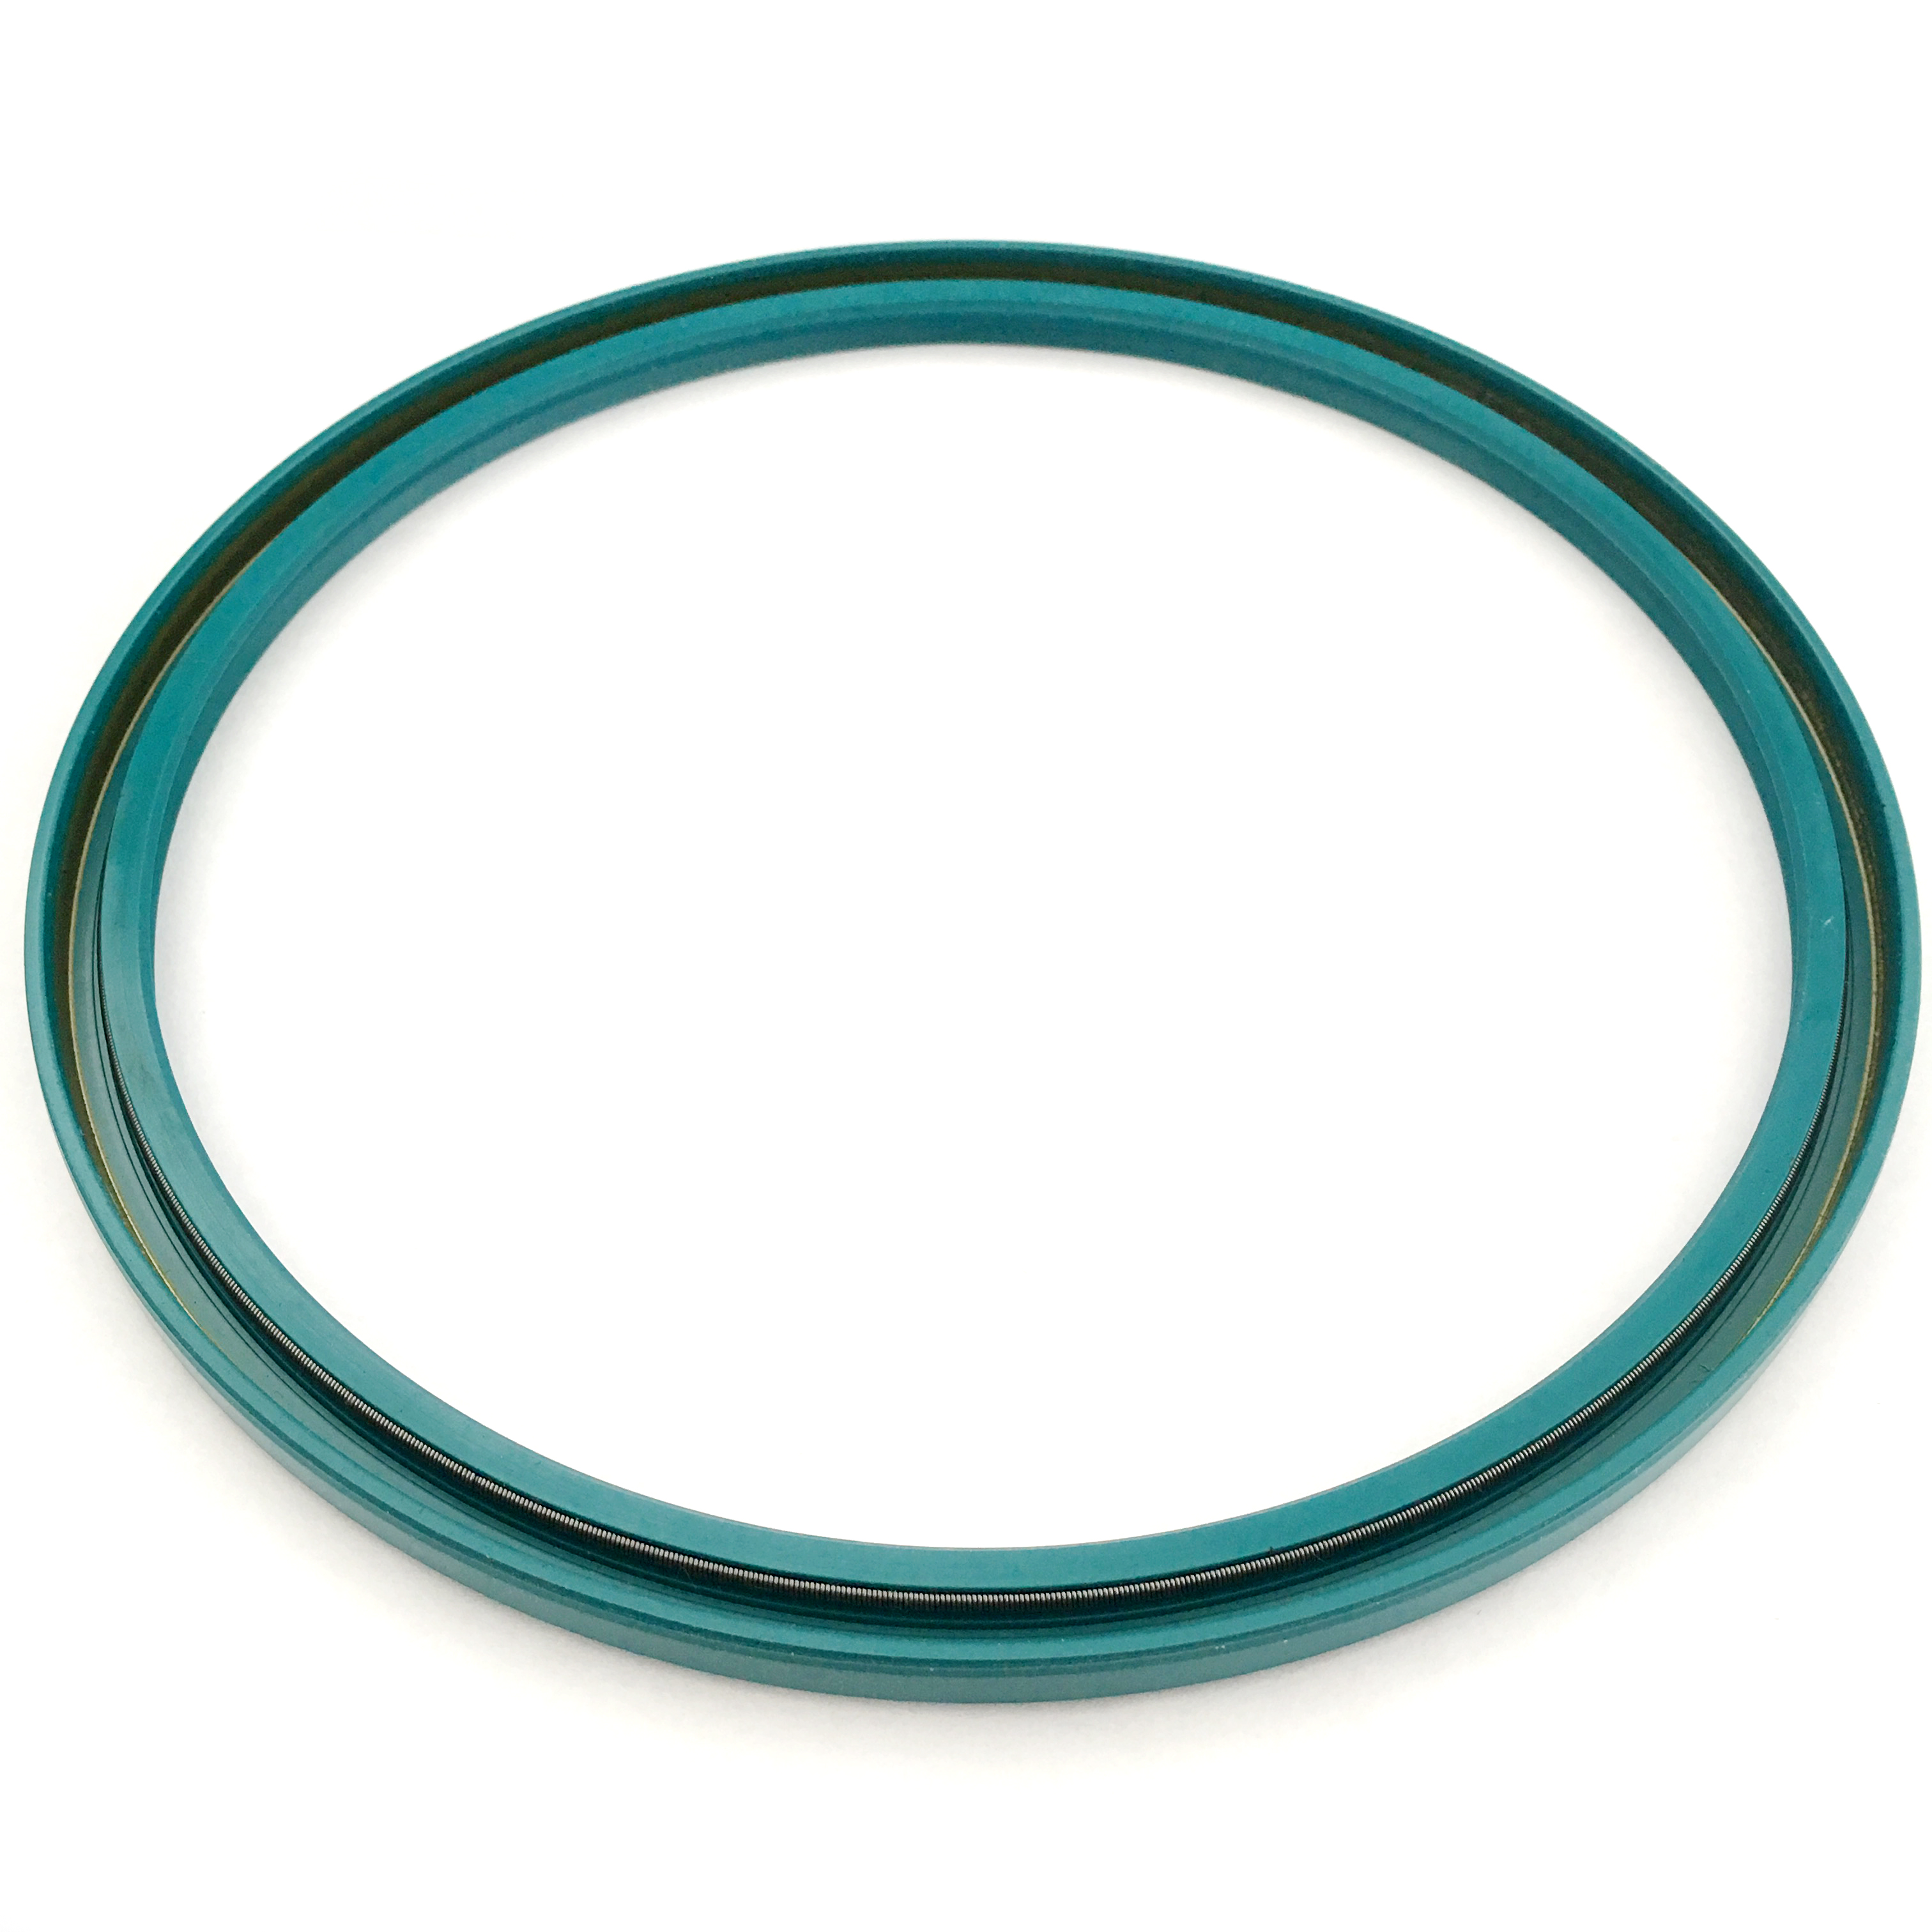 Oil Seal For Mercedes-Benz 170*190*8.5/9.5 OE 0059978447